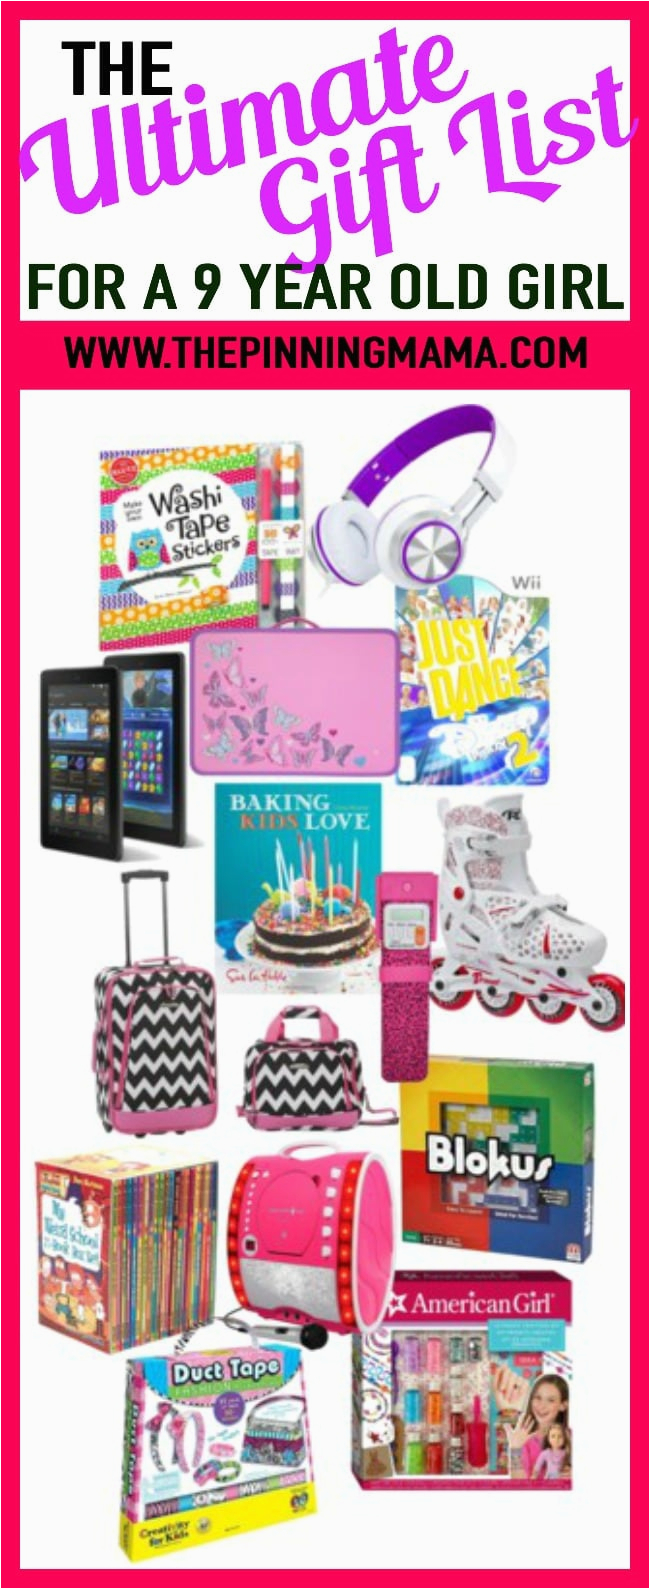 the ultimate gift list for a 9 year old girl